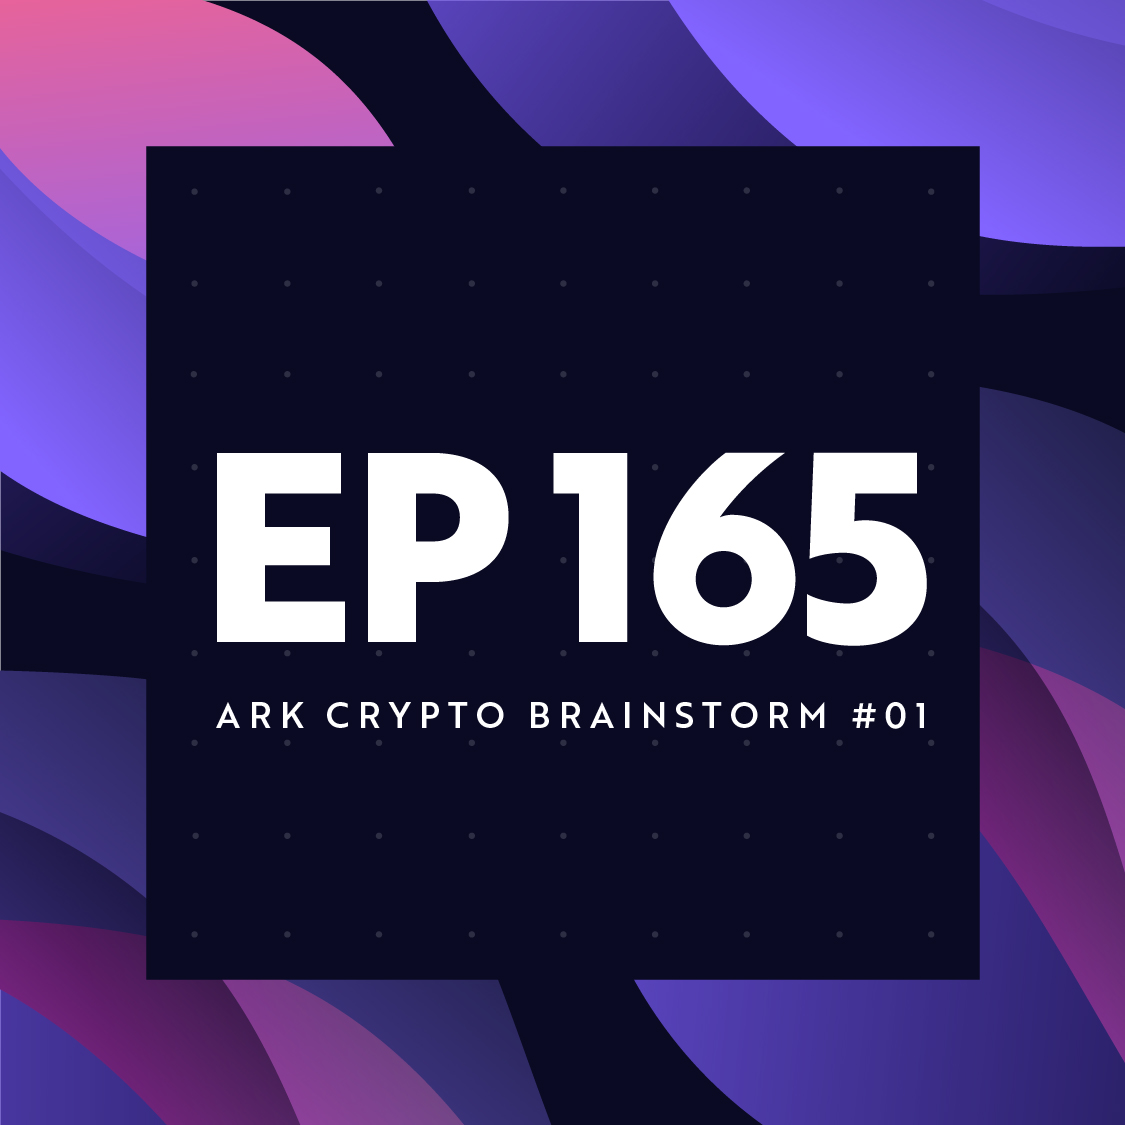 ARK Crypto Brainstorm #01: The Aftermath of FTX